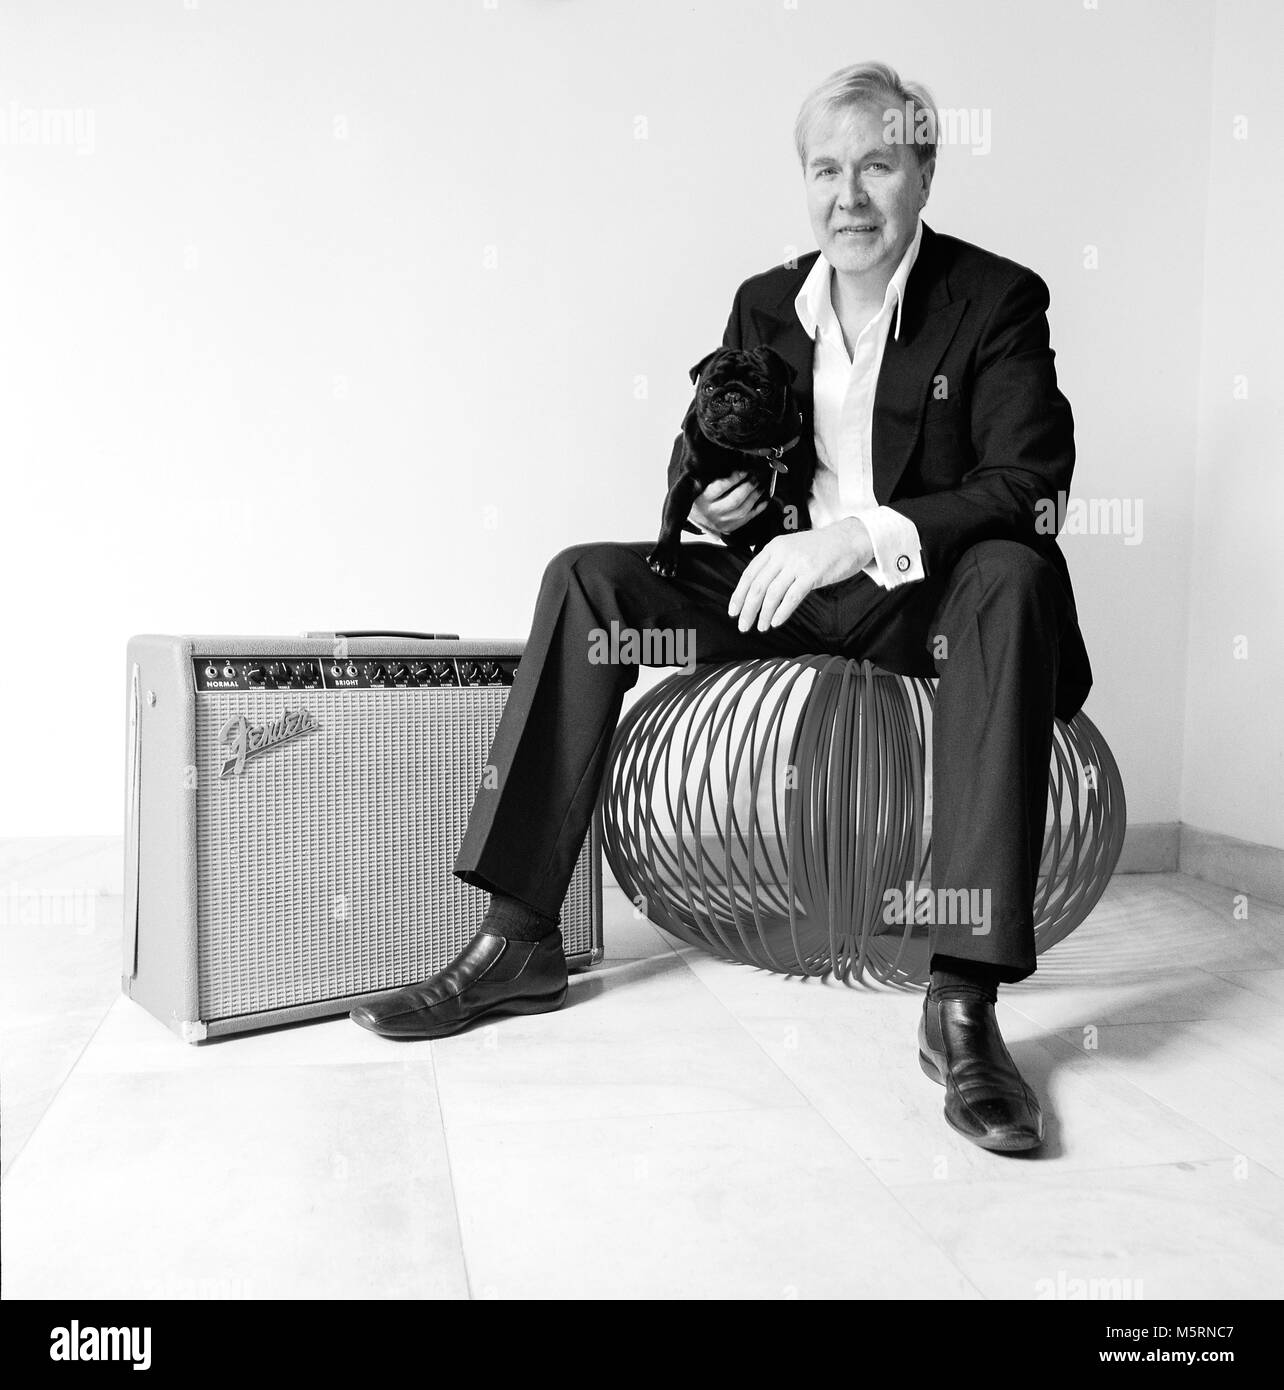 English singer Martin Fry photographed at home in London, England, United Kingdom. 15th March 2004. Stock Photo